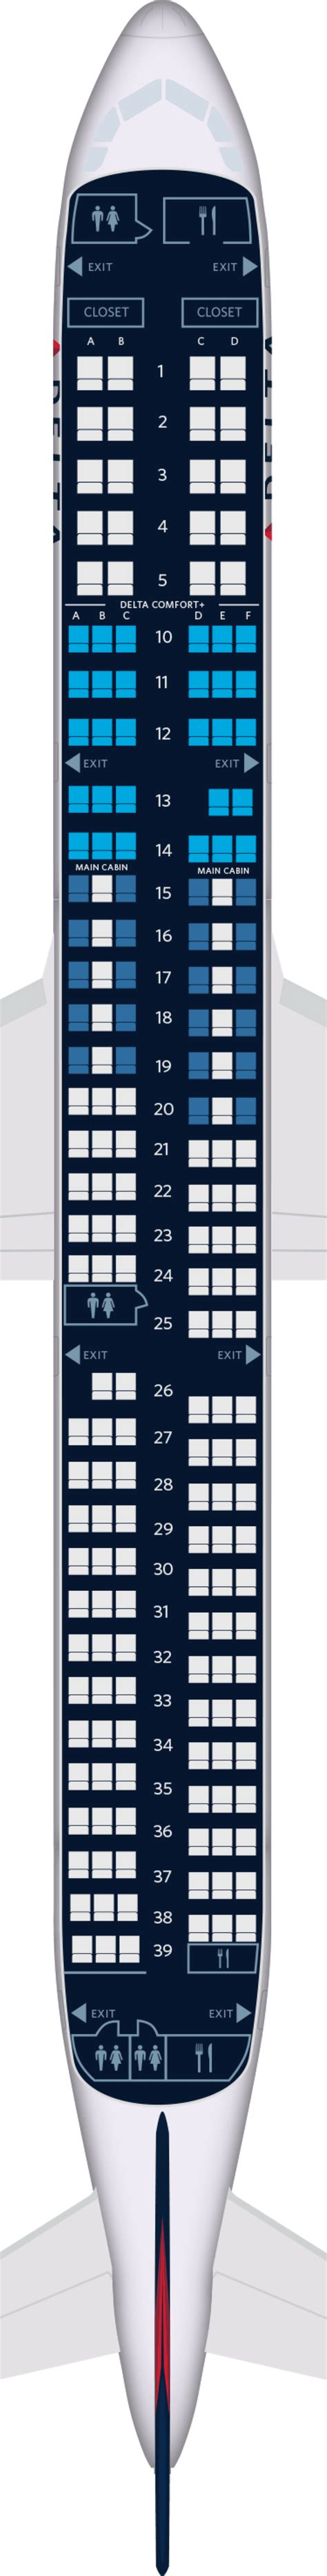 lufthansa a321 seat map  The seats 1A, 1C and 2D, 2F have extra legroom due to position of the bulkhead